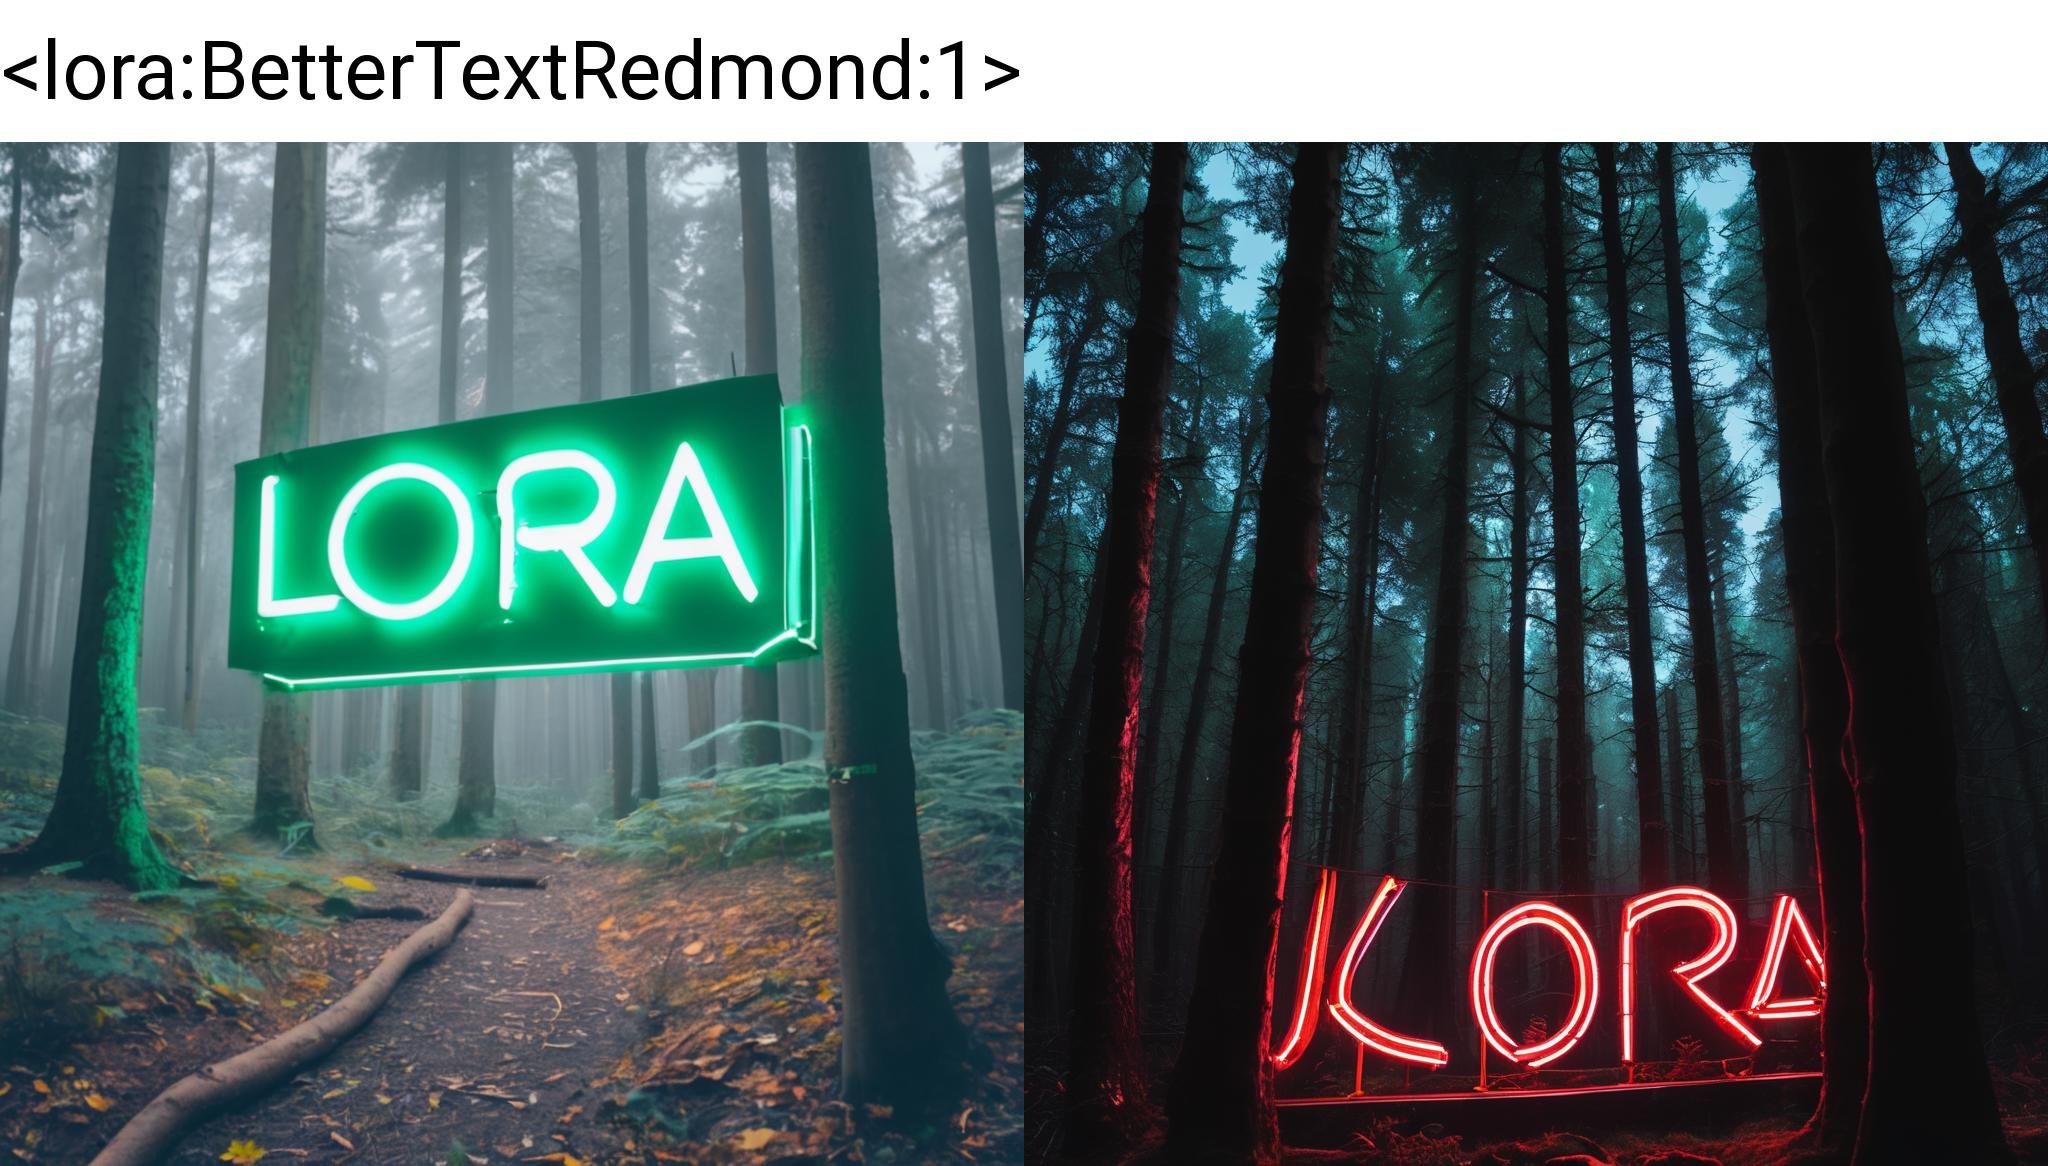 A neon sign that have "LORA" write on it in a forest <lora:BetterTextRedmond:1>